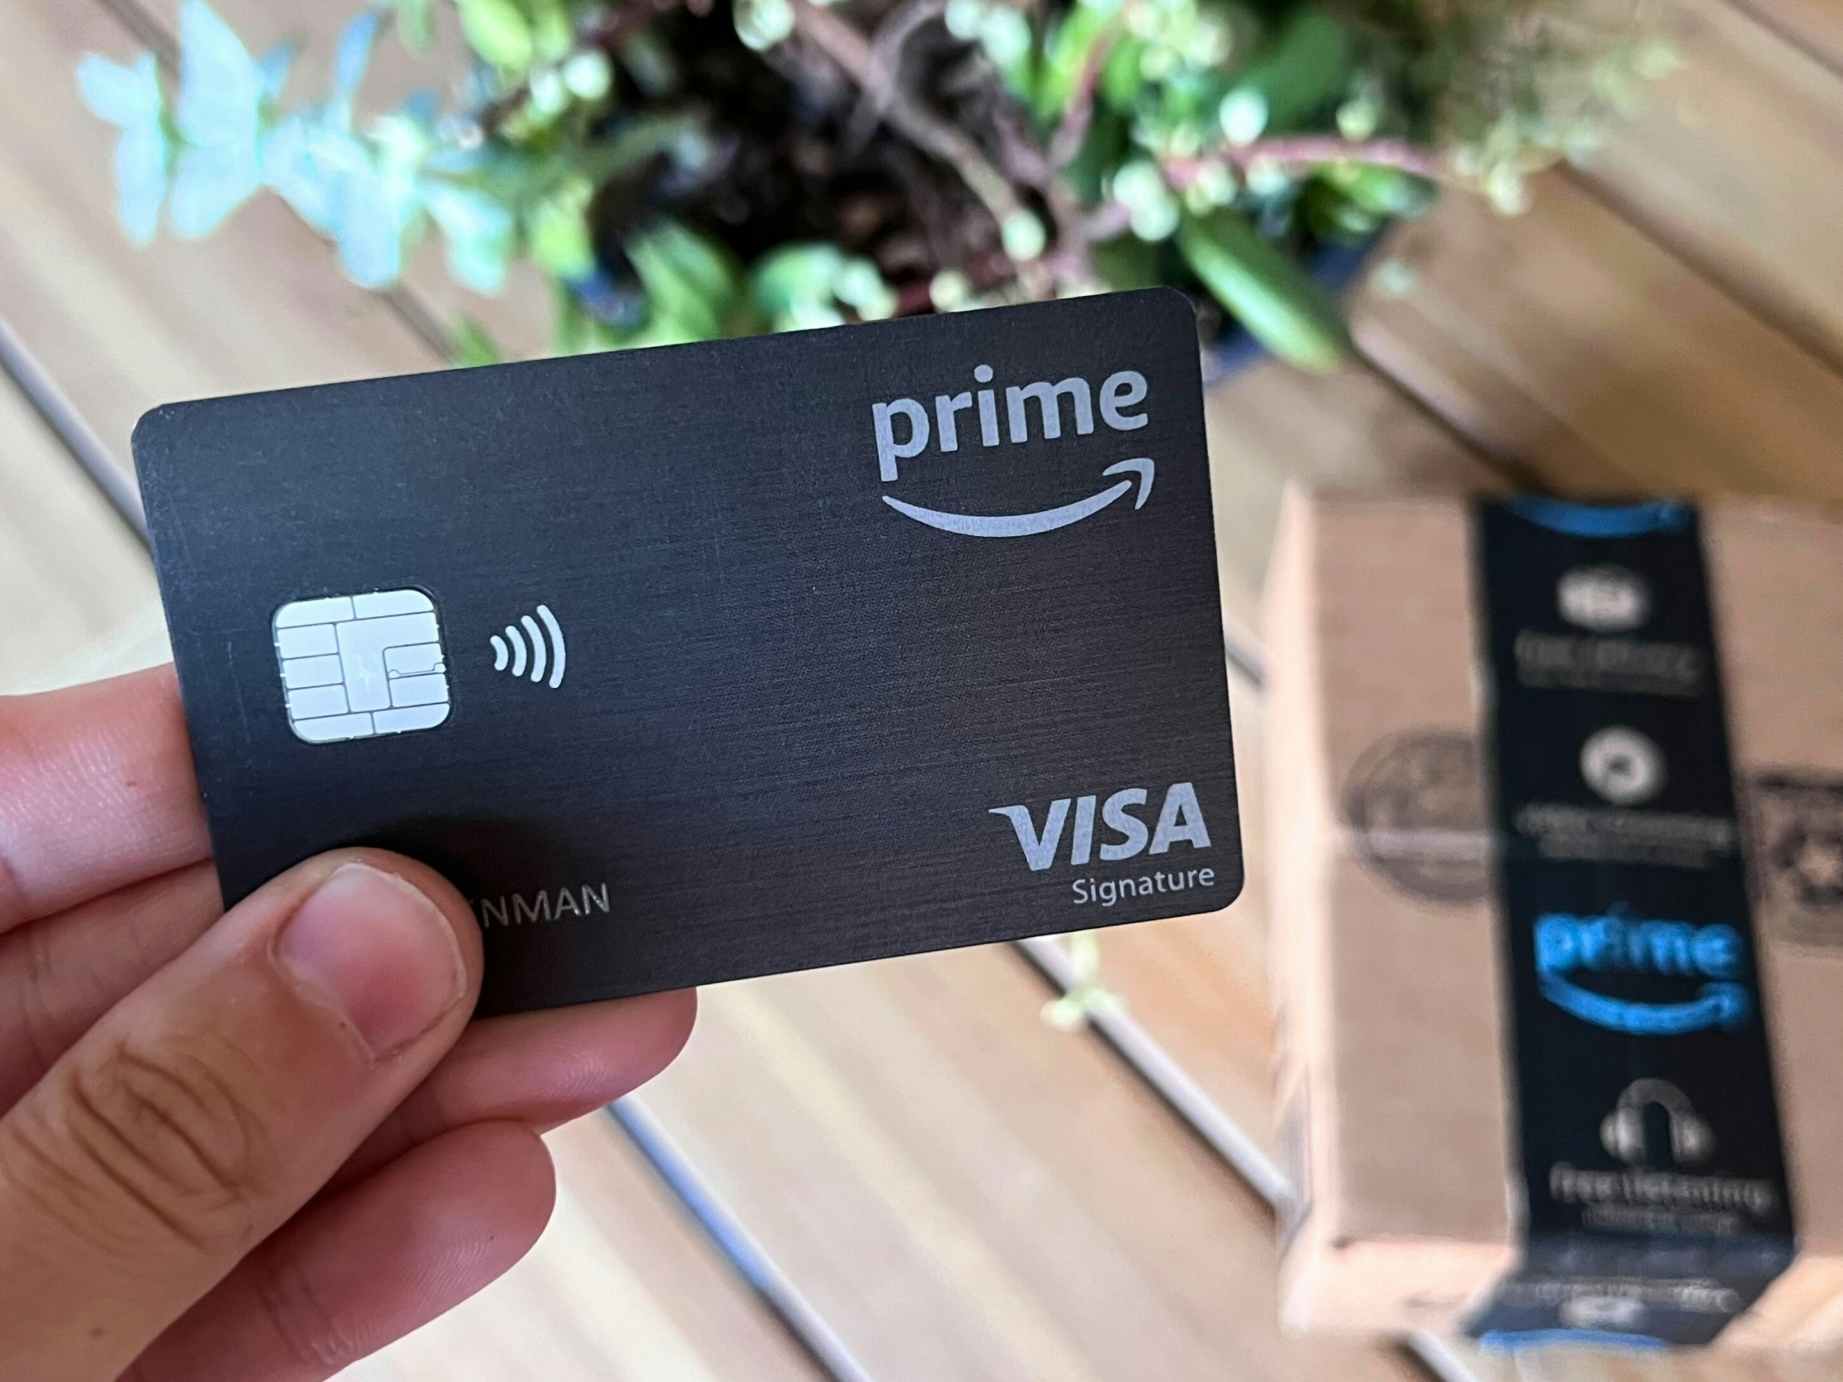 Someone holding an Amazon Prime credit card next to an Amazon box